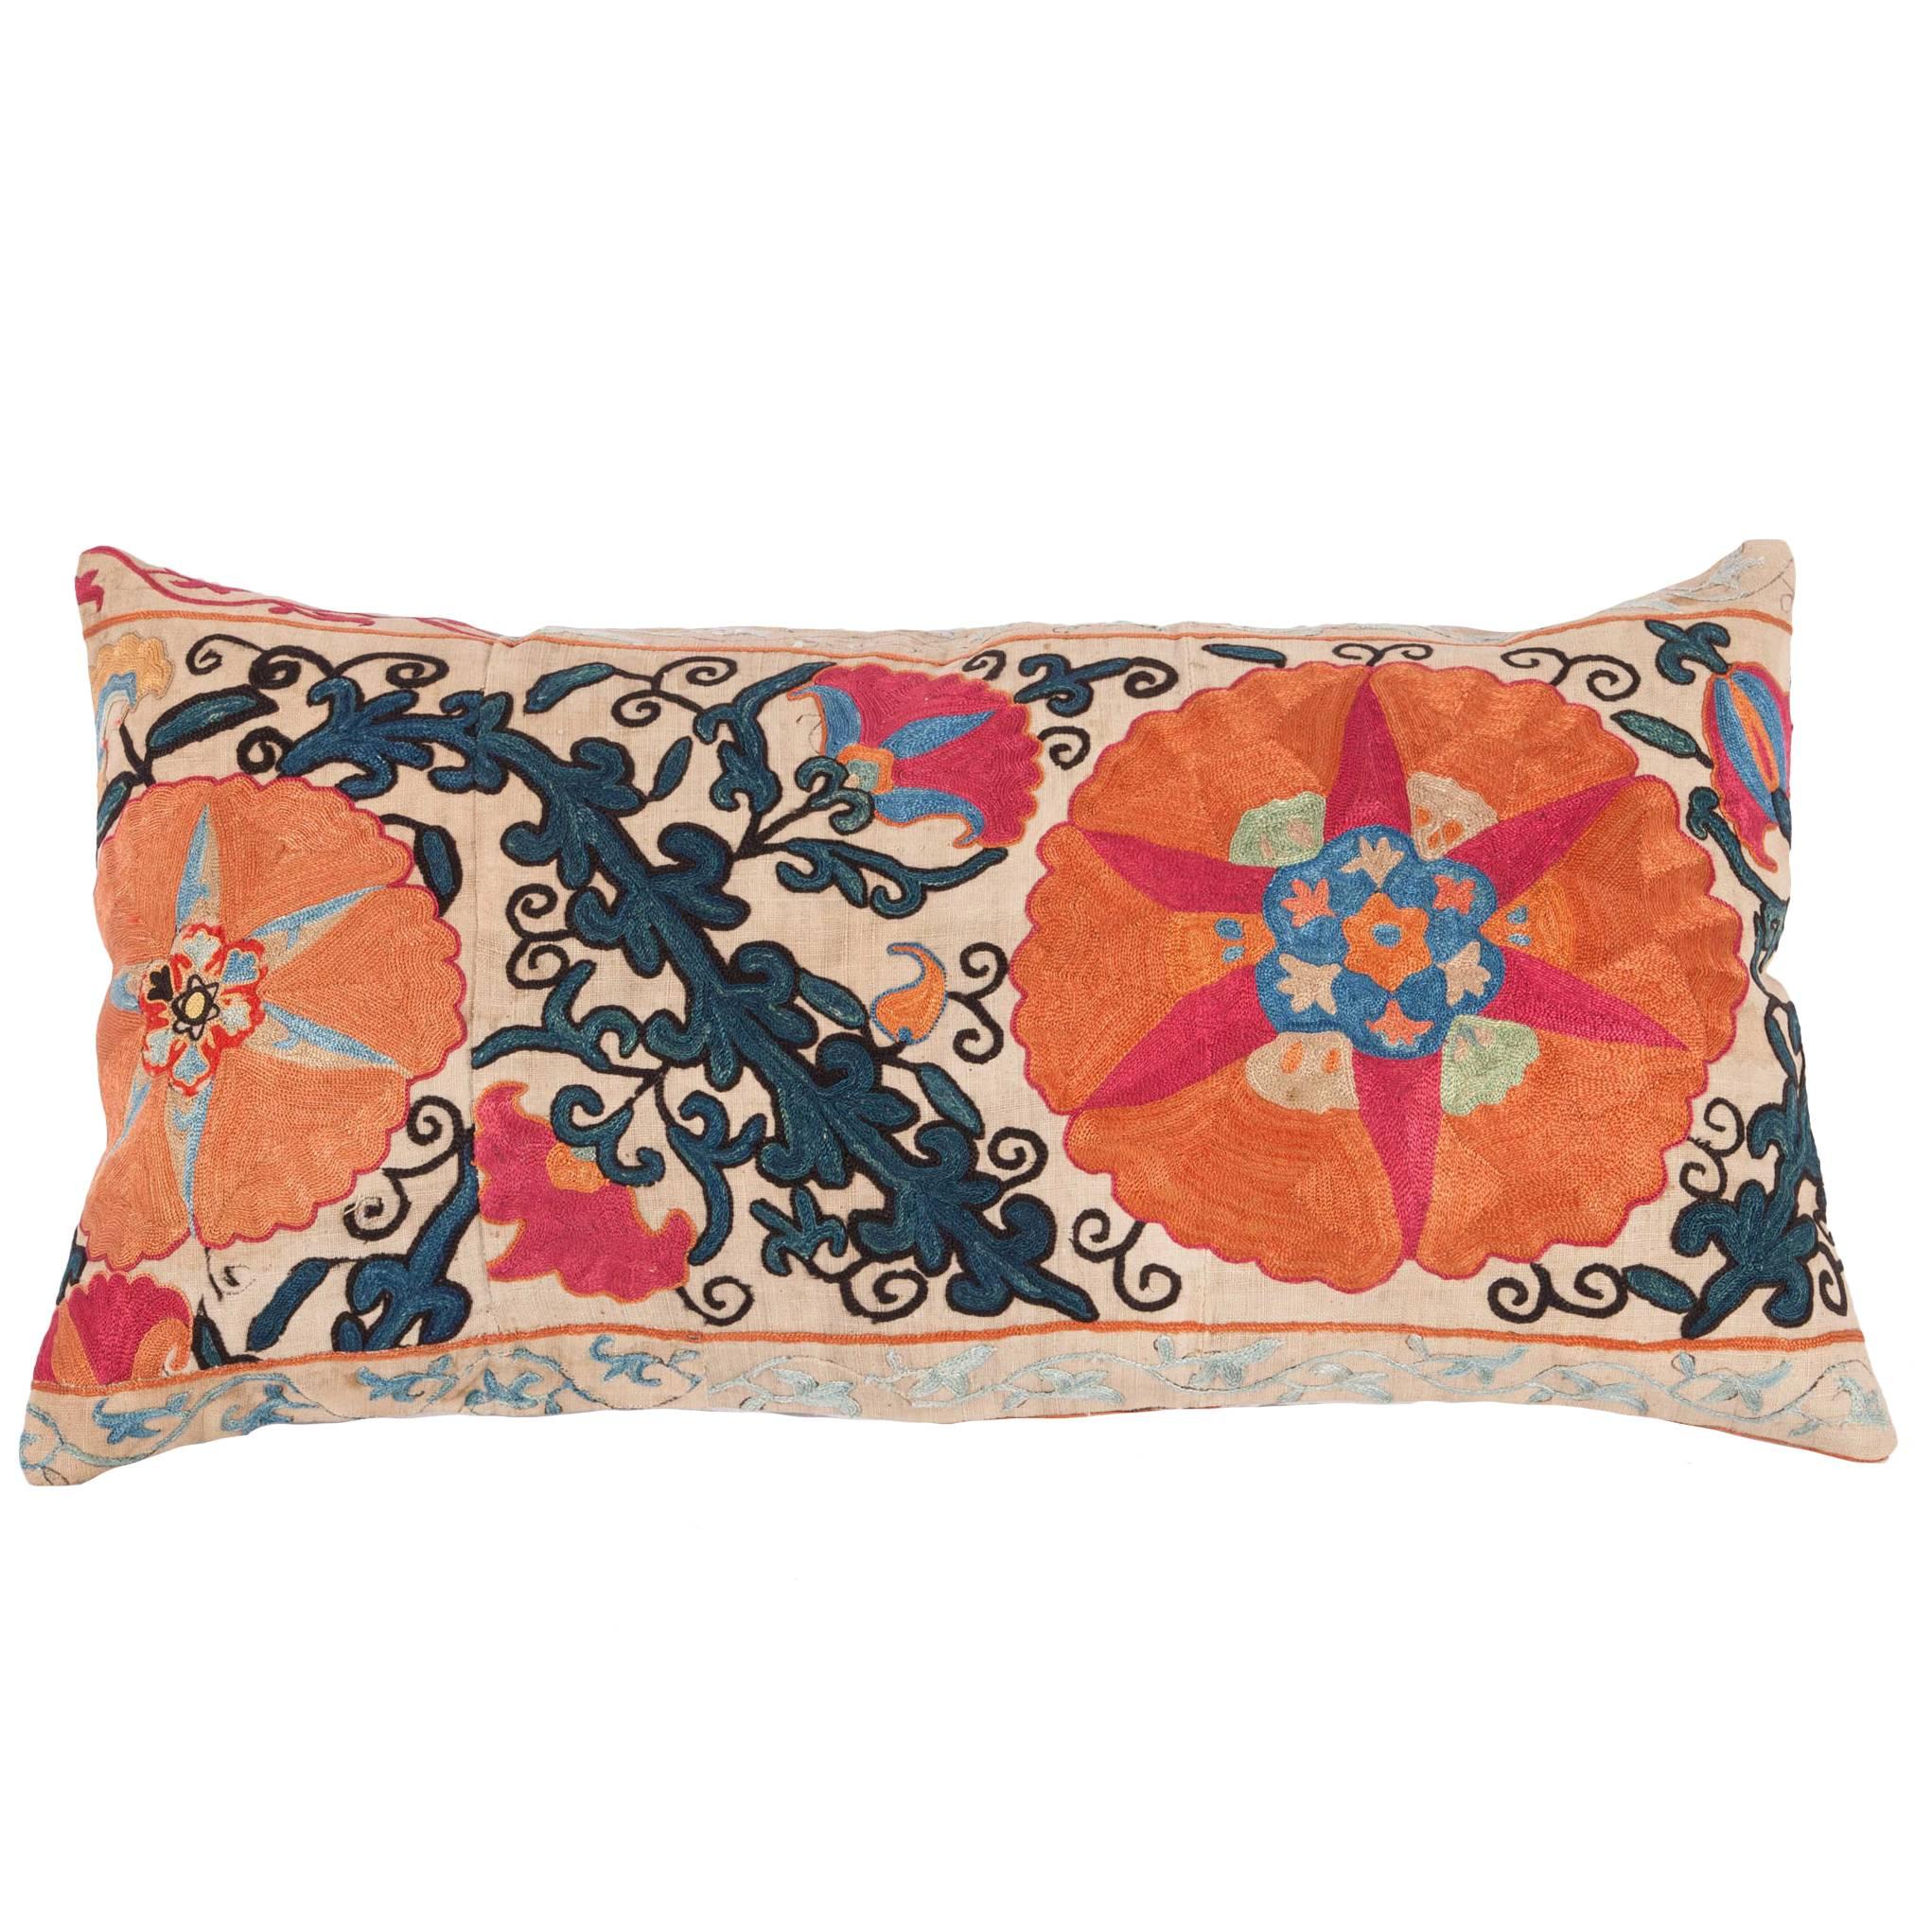 Pillow Fashioned from an Antique 19th Century Uzbek Suzani